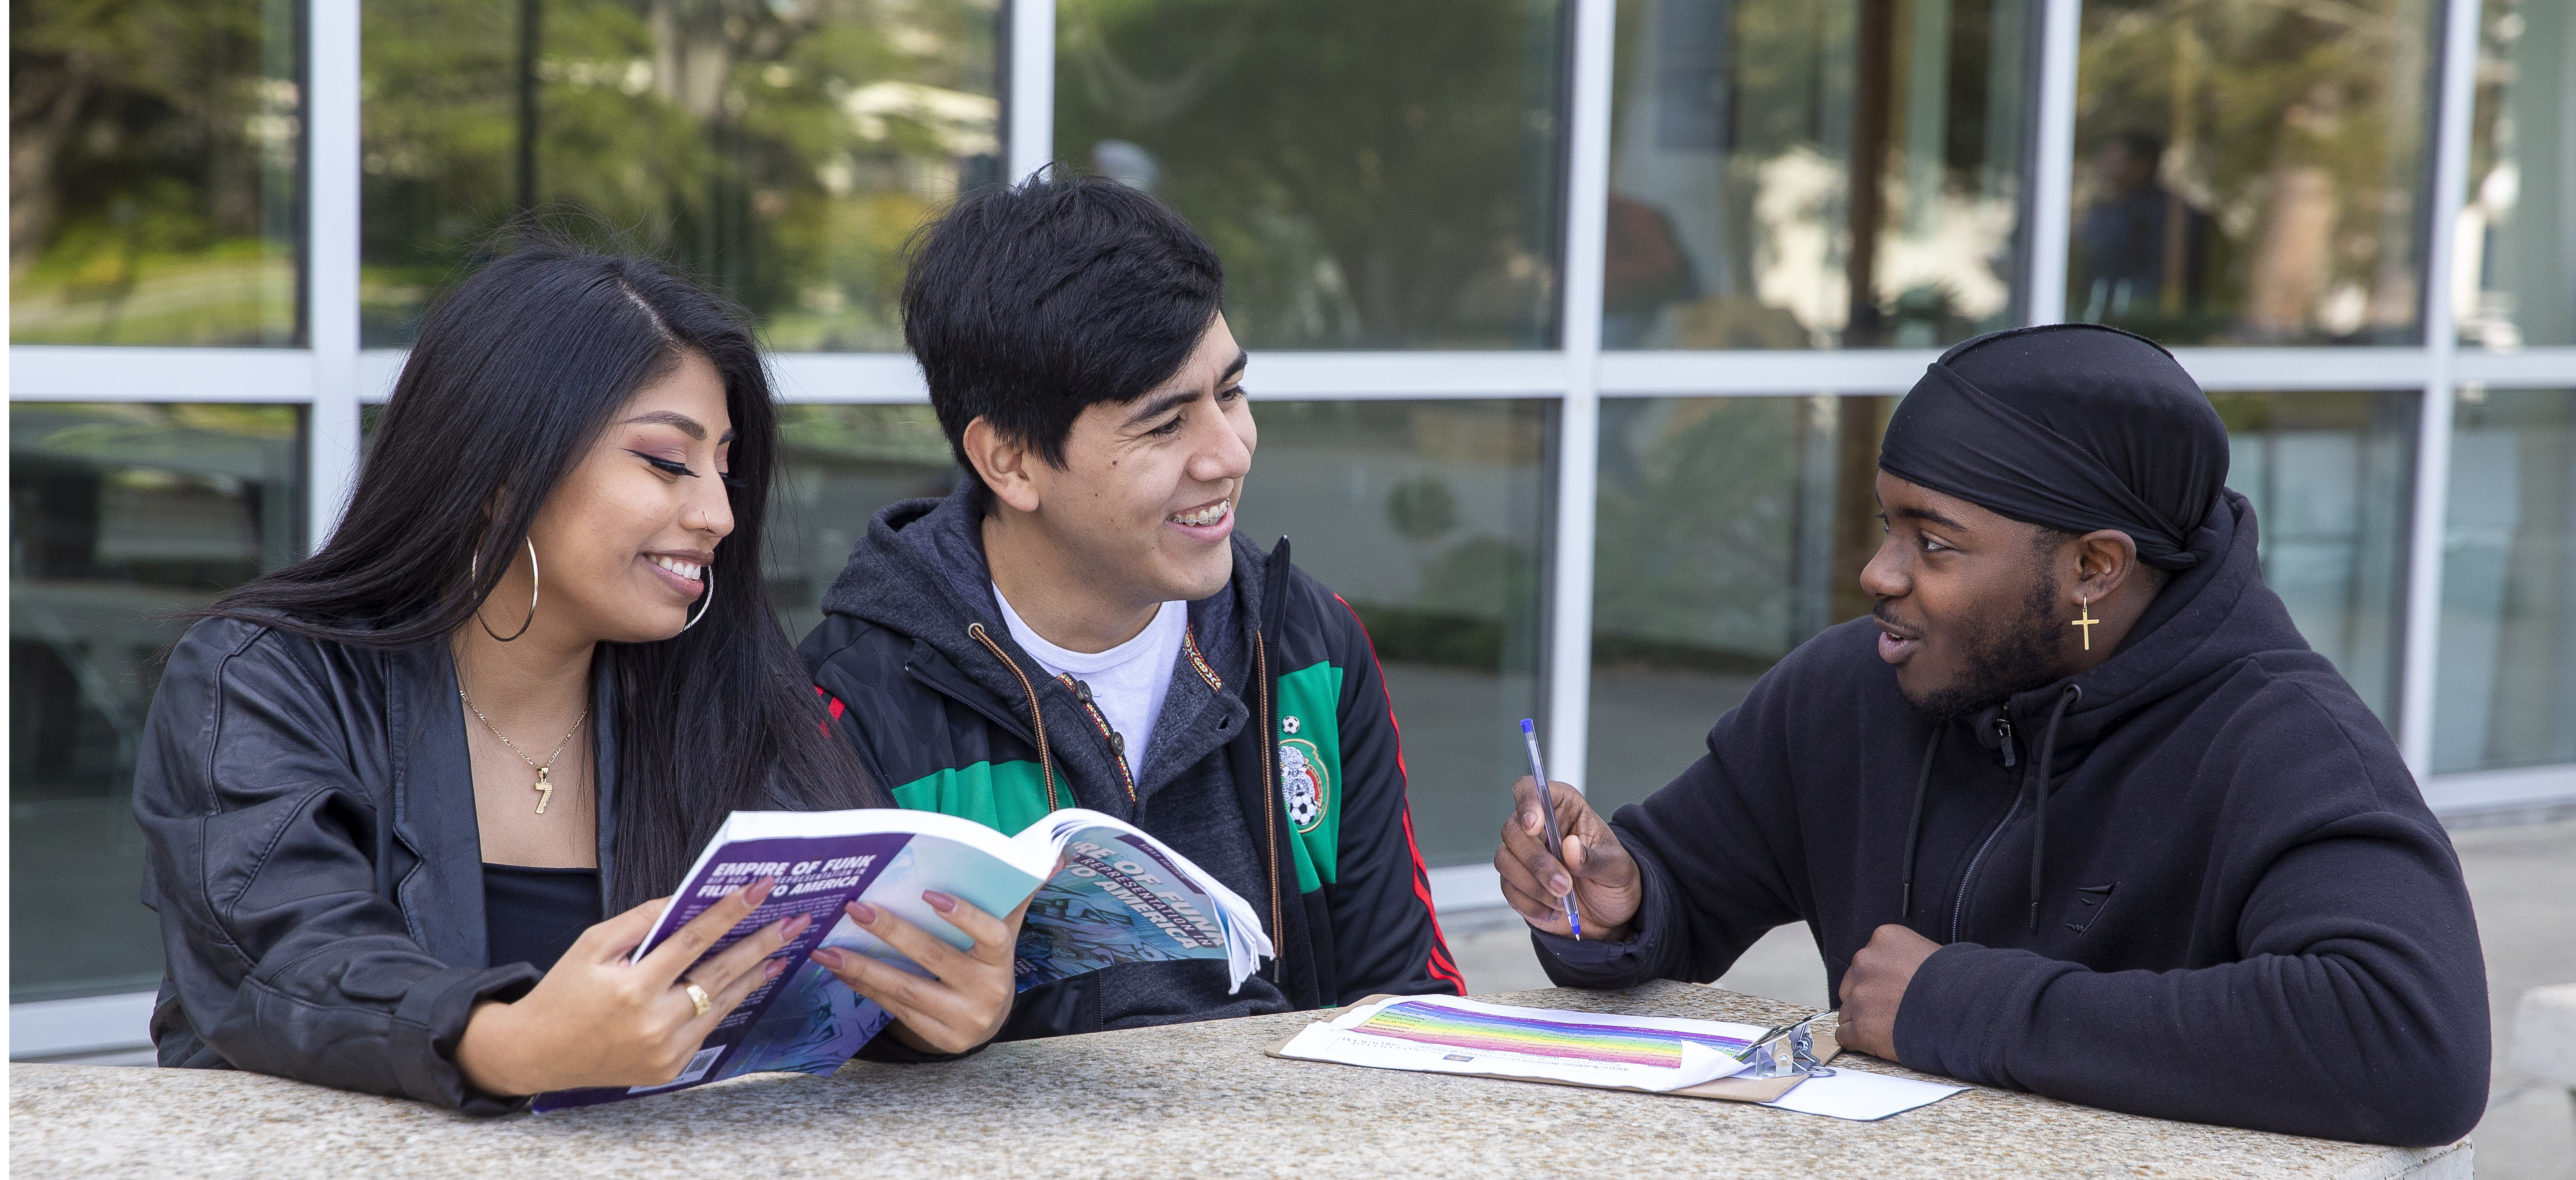 Three students sitting outside the library smiling